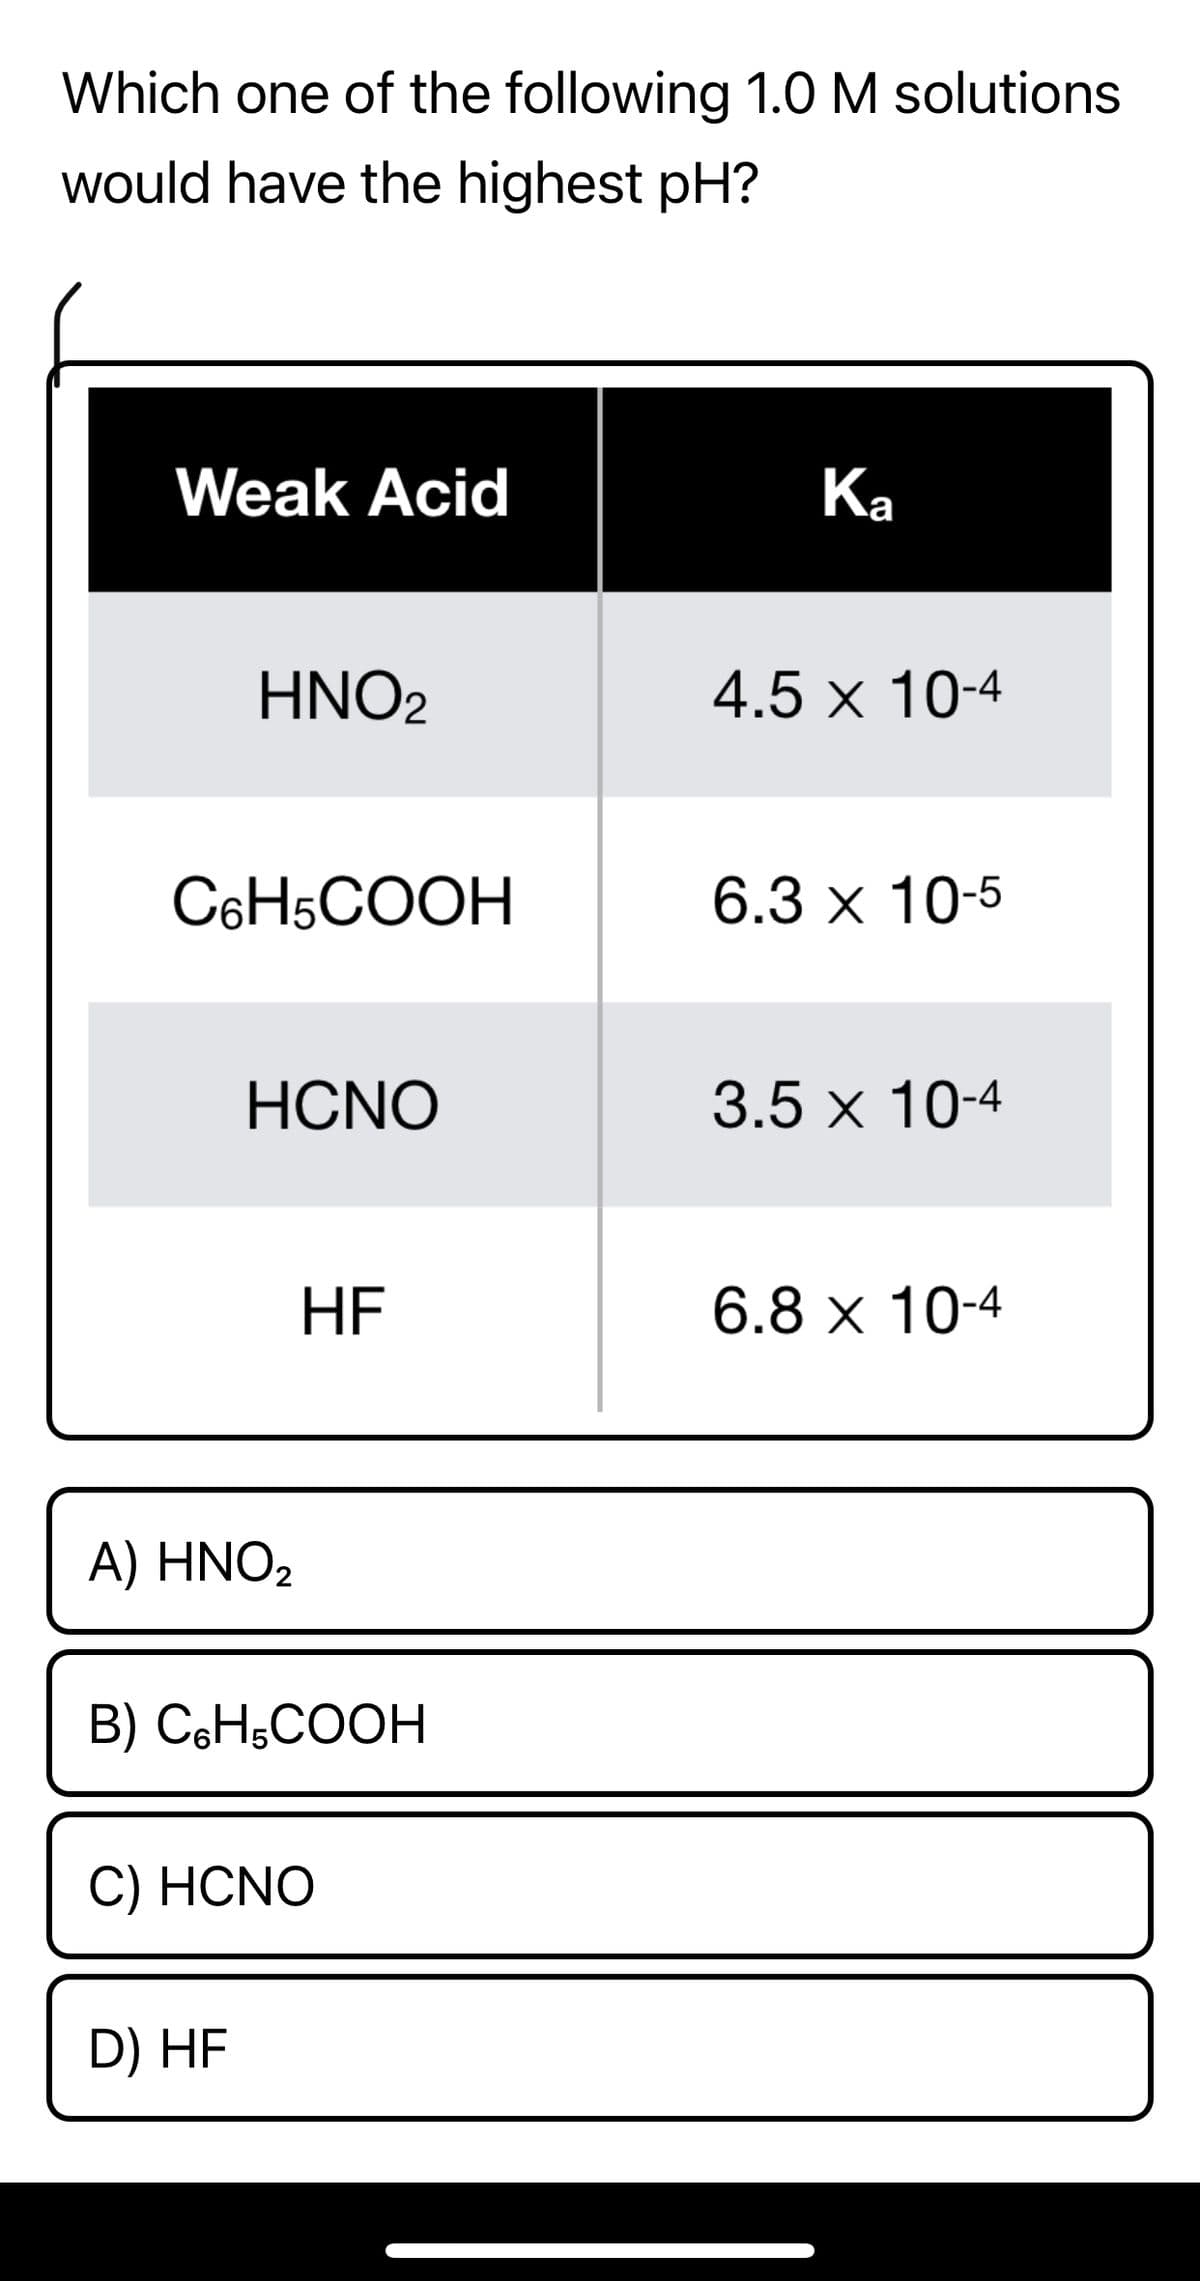 Which one of the following 1.0 M solutions
would have the highest pH?
Weak Acid
Ка
HNO2
4.5 x 10-4
C6H5COOH
6.3 х 10-5
HCNO
3.5 х 10-4
HE
6.8х 10-4
A) HNO2
В) CаН.СООН
C) HCNO
D) HF
